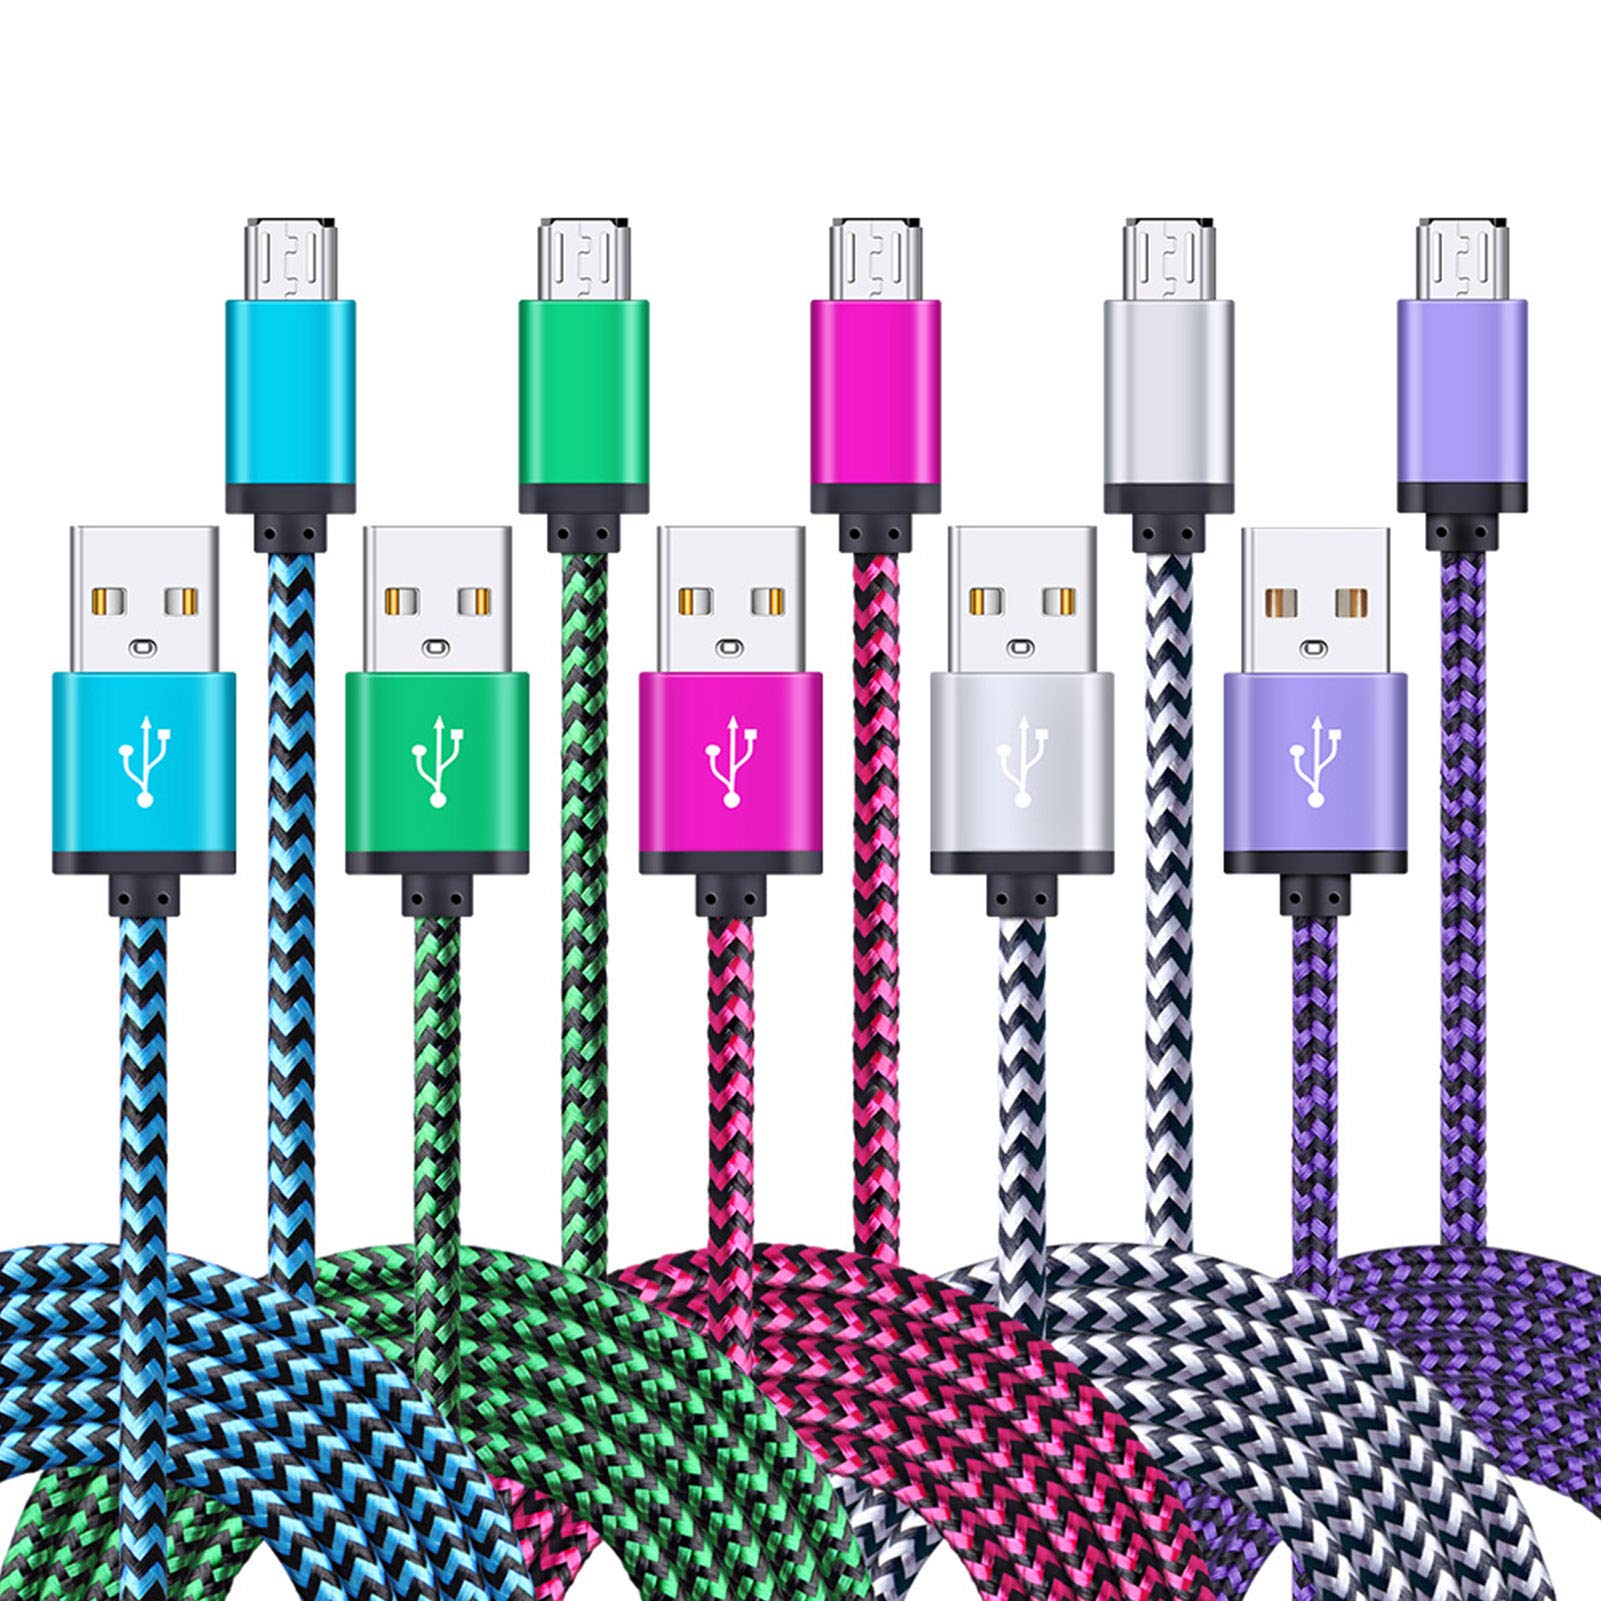 Book Cover FiveBox Micro USB Charger Cable, 5-Pack 6ft Micro USB Cable Cord Braided Fast Charging Phone Charger for Samsung Galaxy J3 J7 S6 S7 Edge, Tablet, LG stylo 2/3 LG G3 G4 K30 K20 Plus, Old Kindle 7 8 10